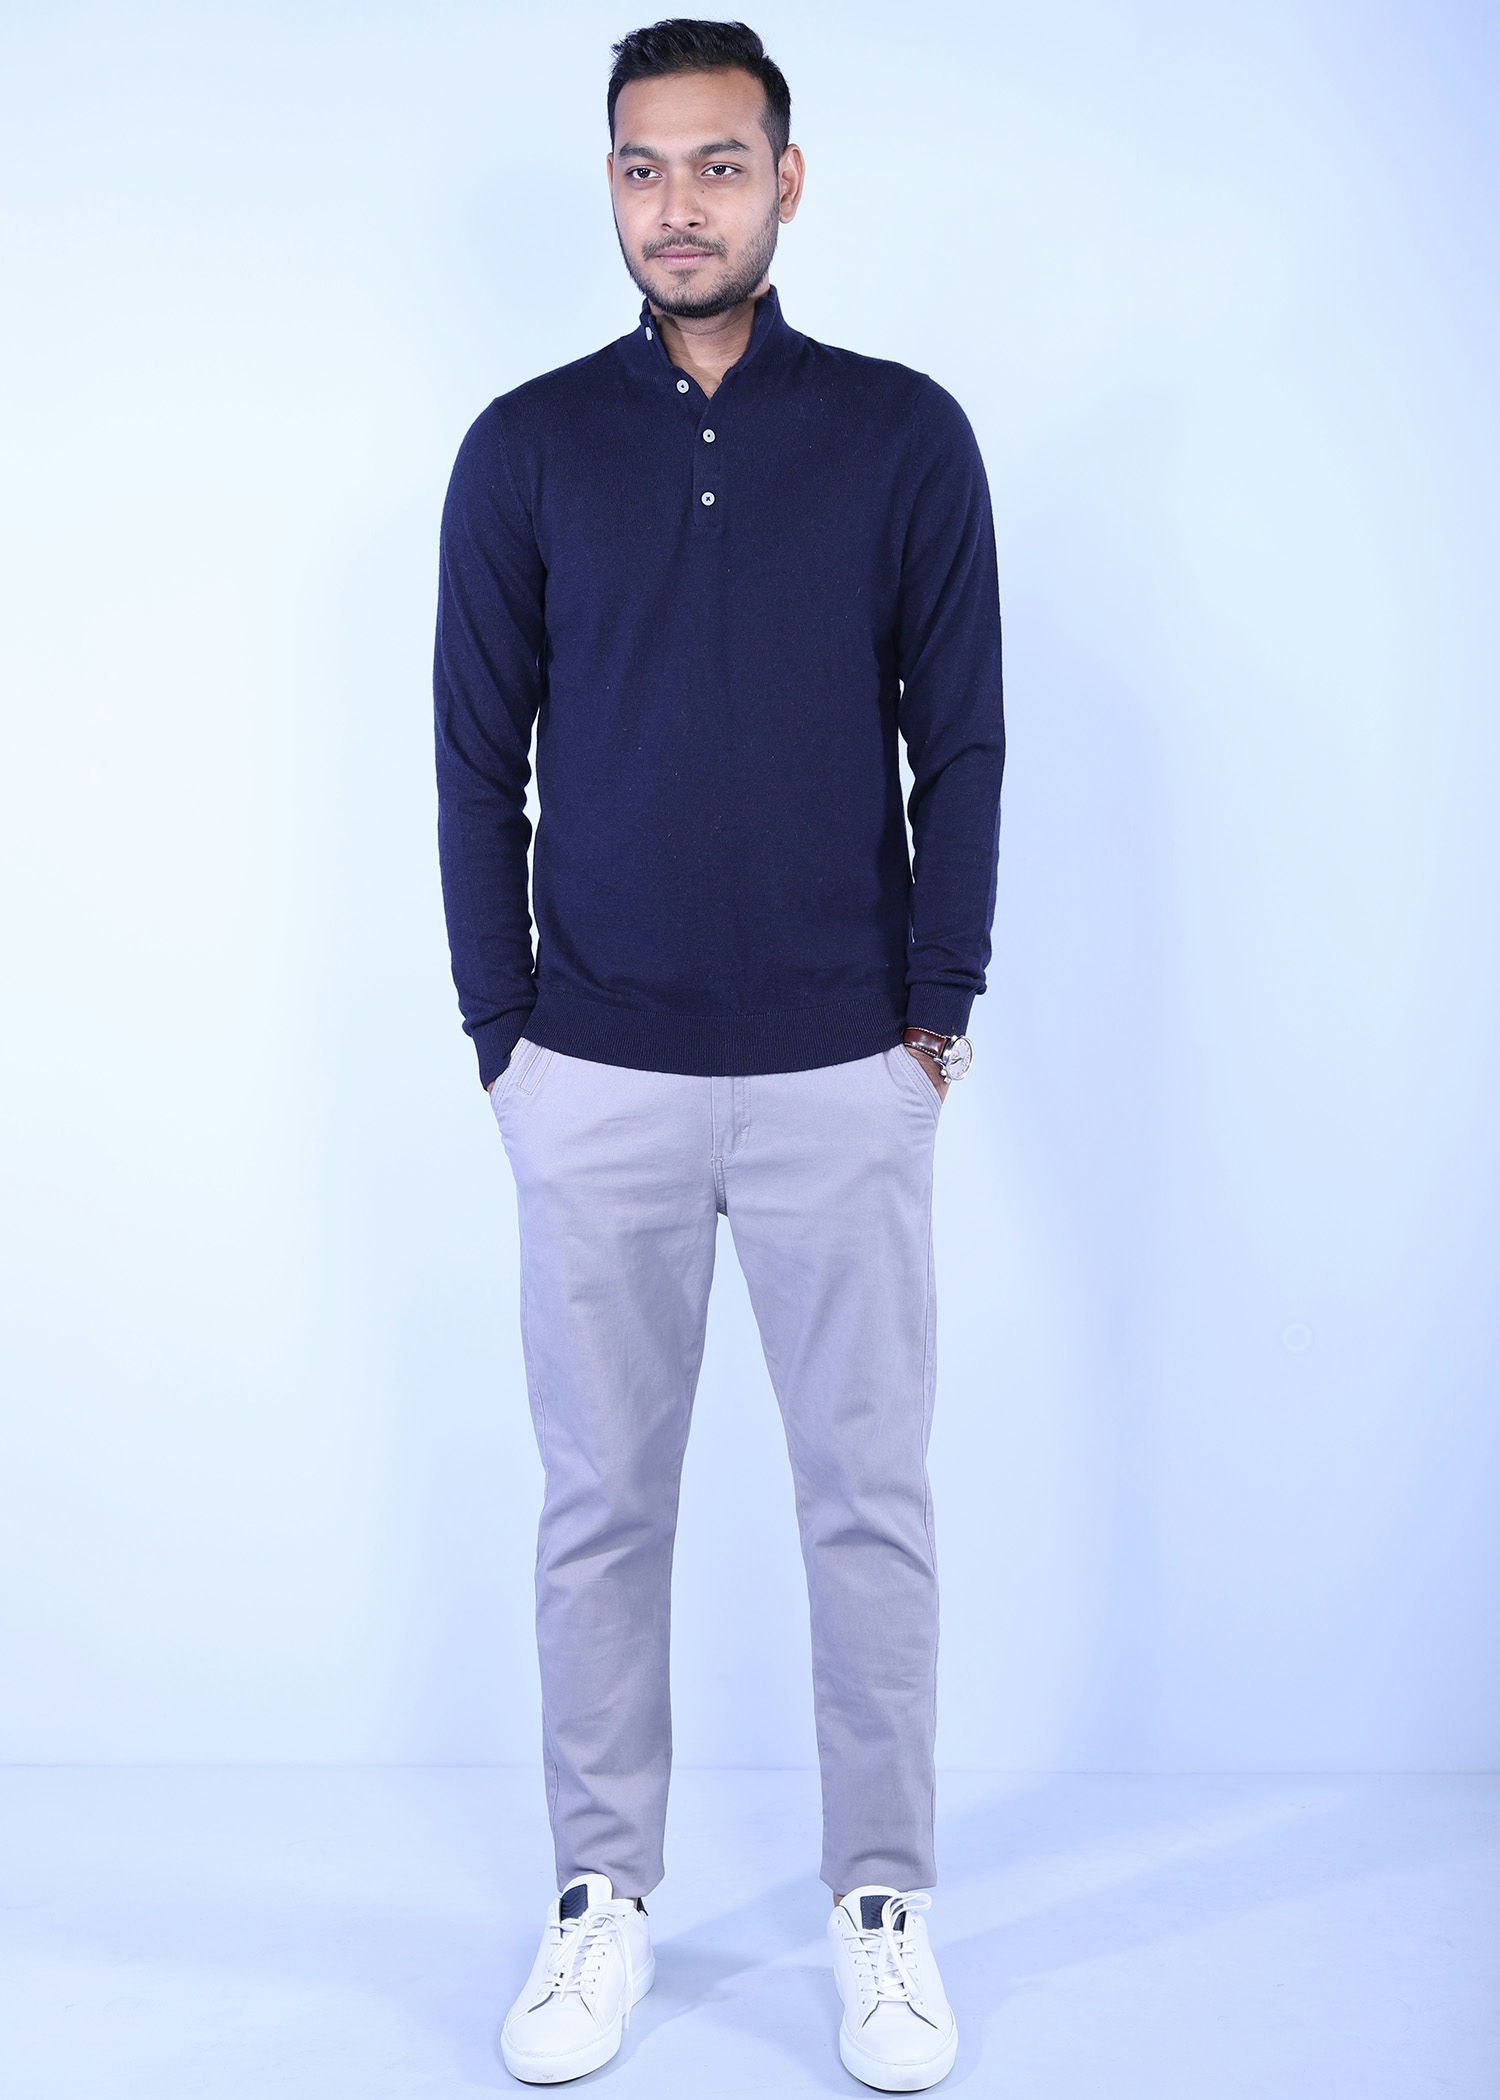 hornero i sweater navy color full front view